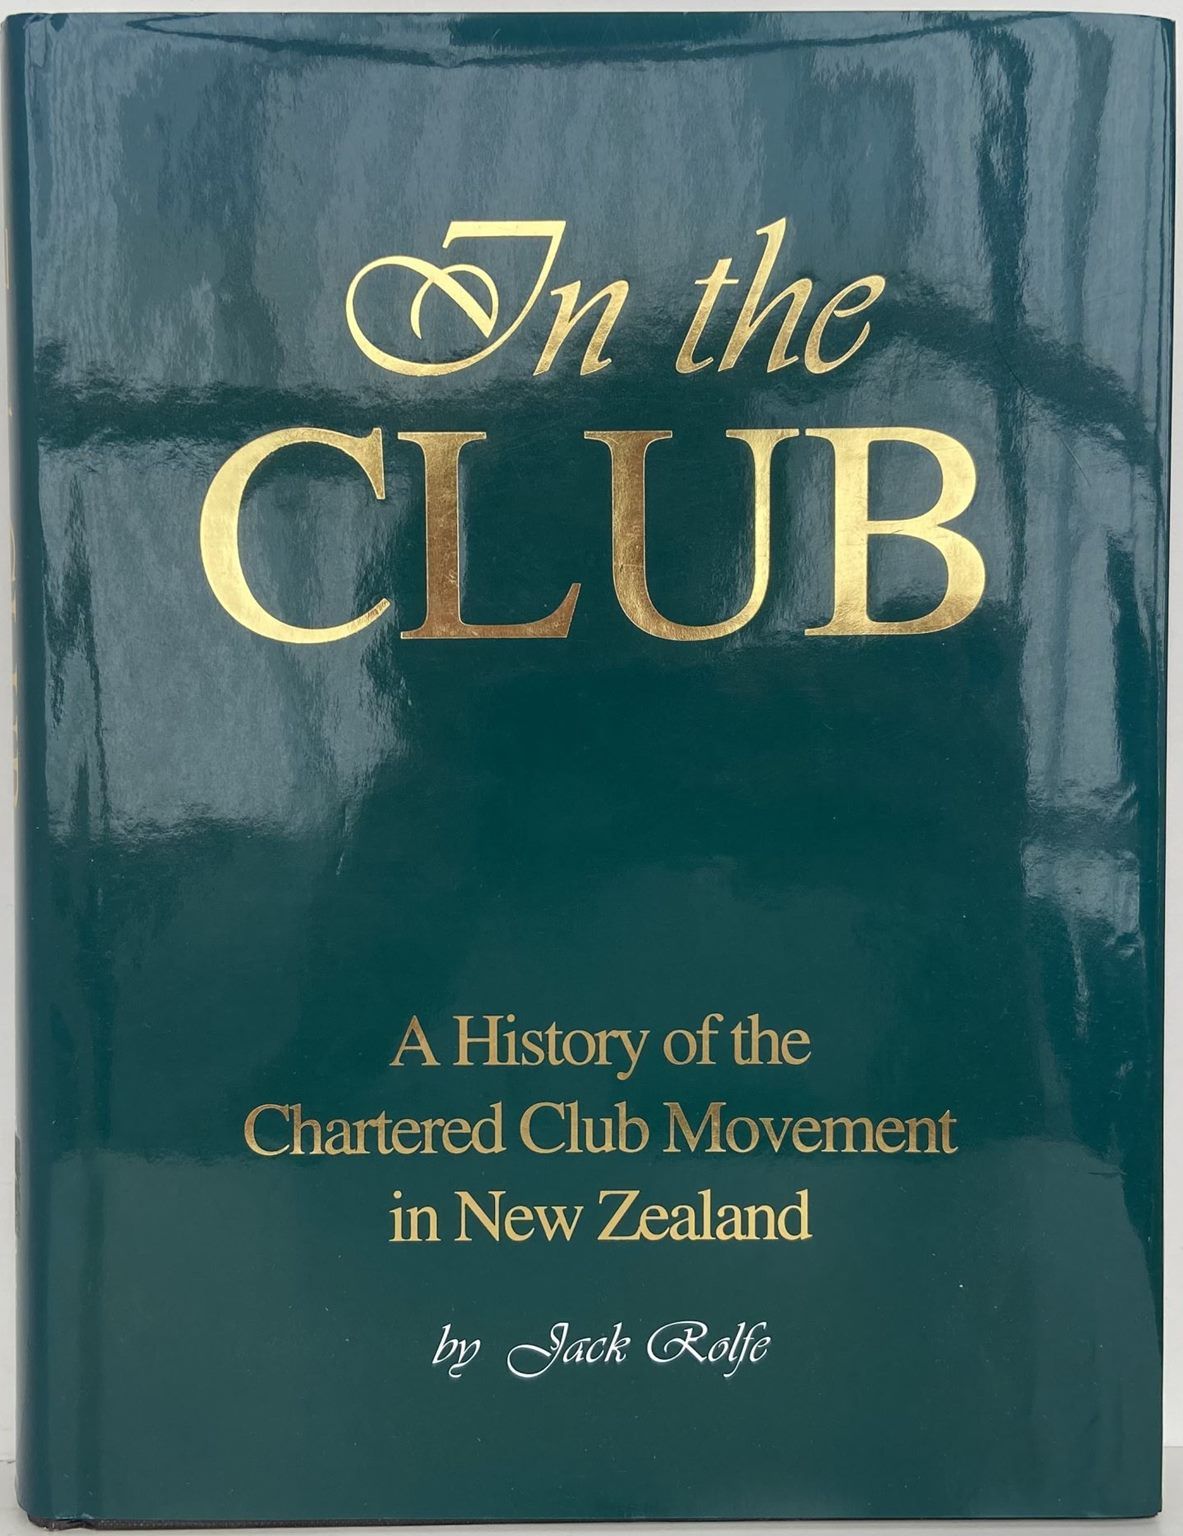 IN THE CLUB: A History of Chartered Club Movement in New Zealand